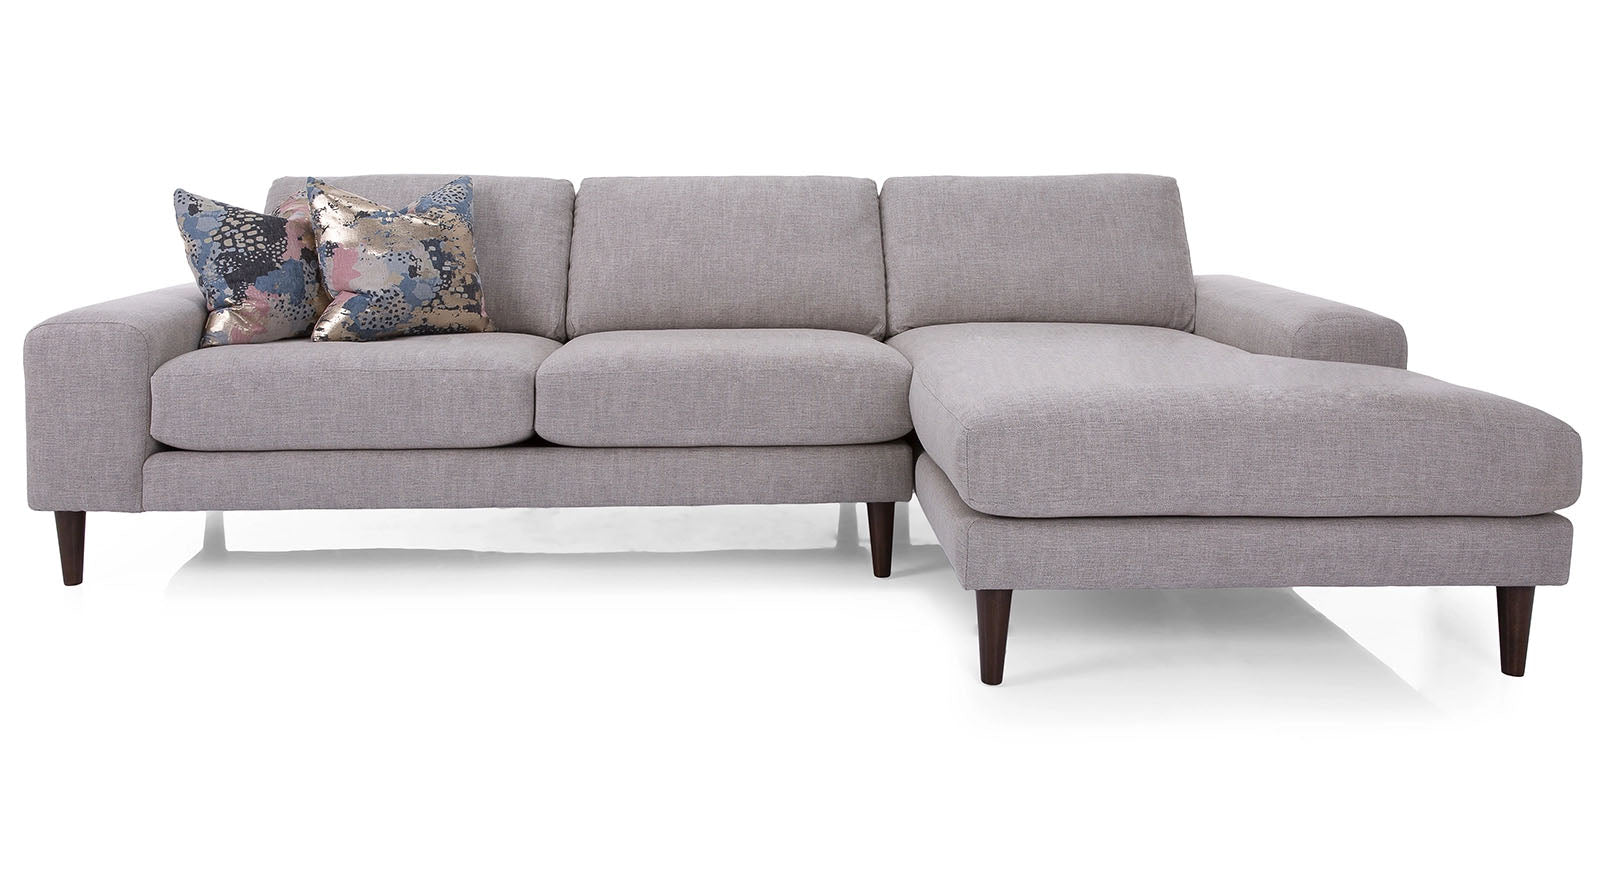 Abby 2 Piece Sectional - MJM Furniture